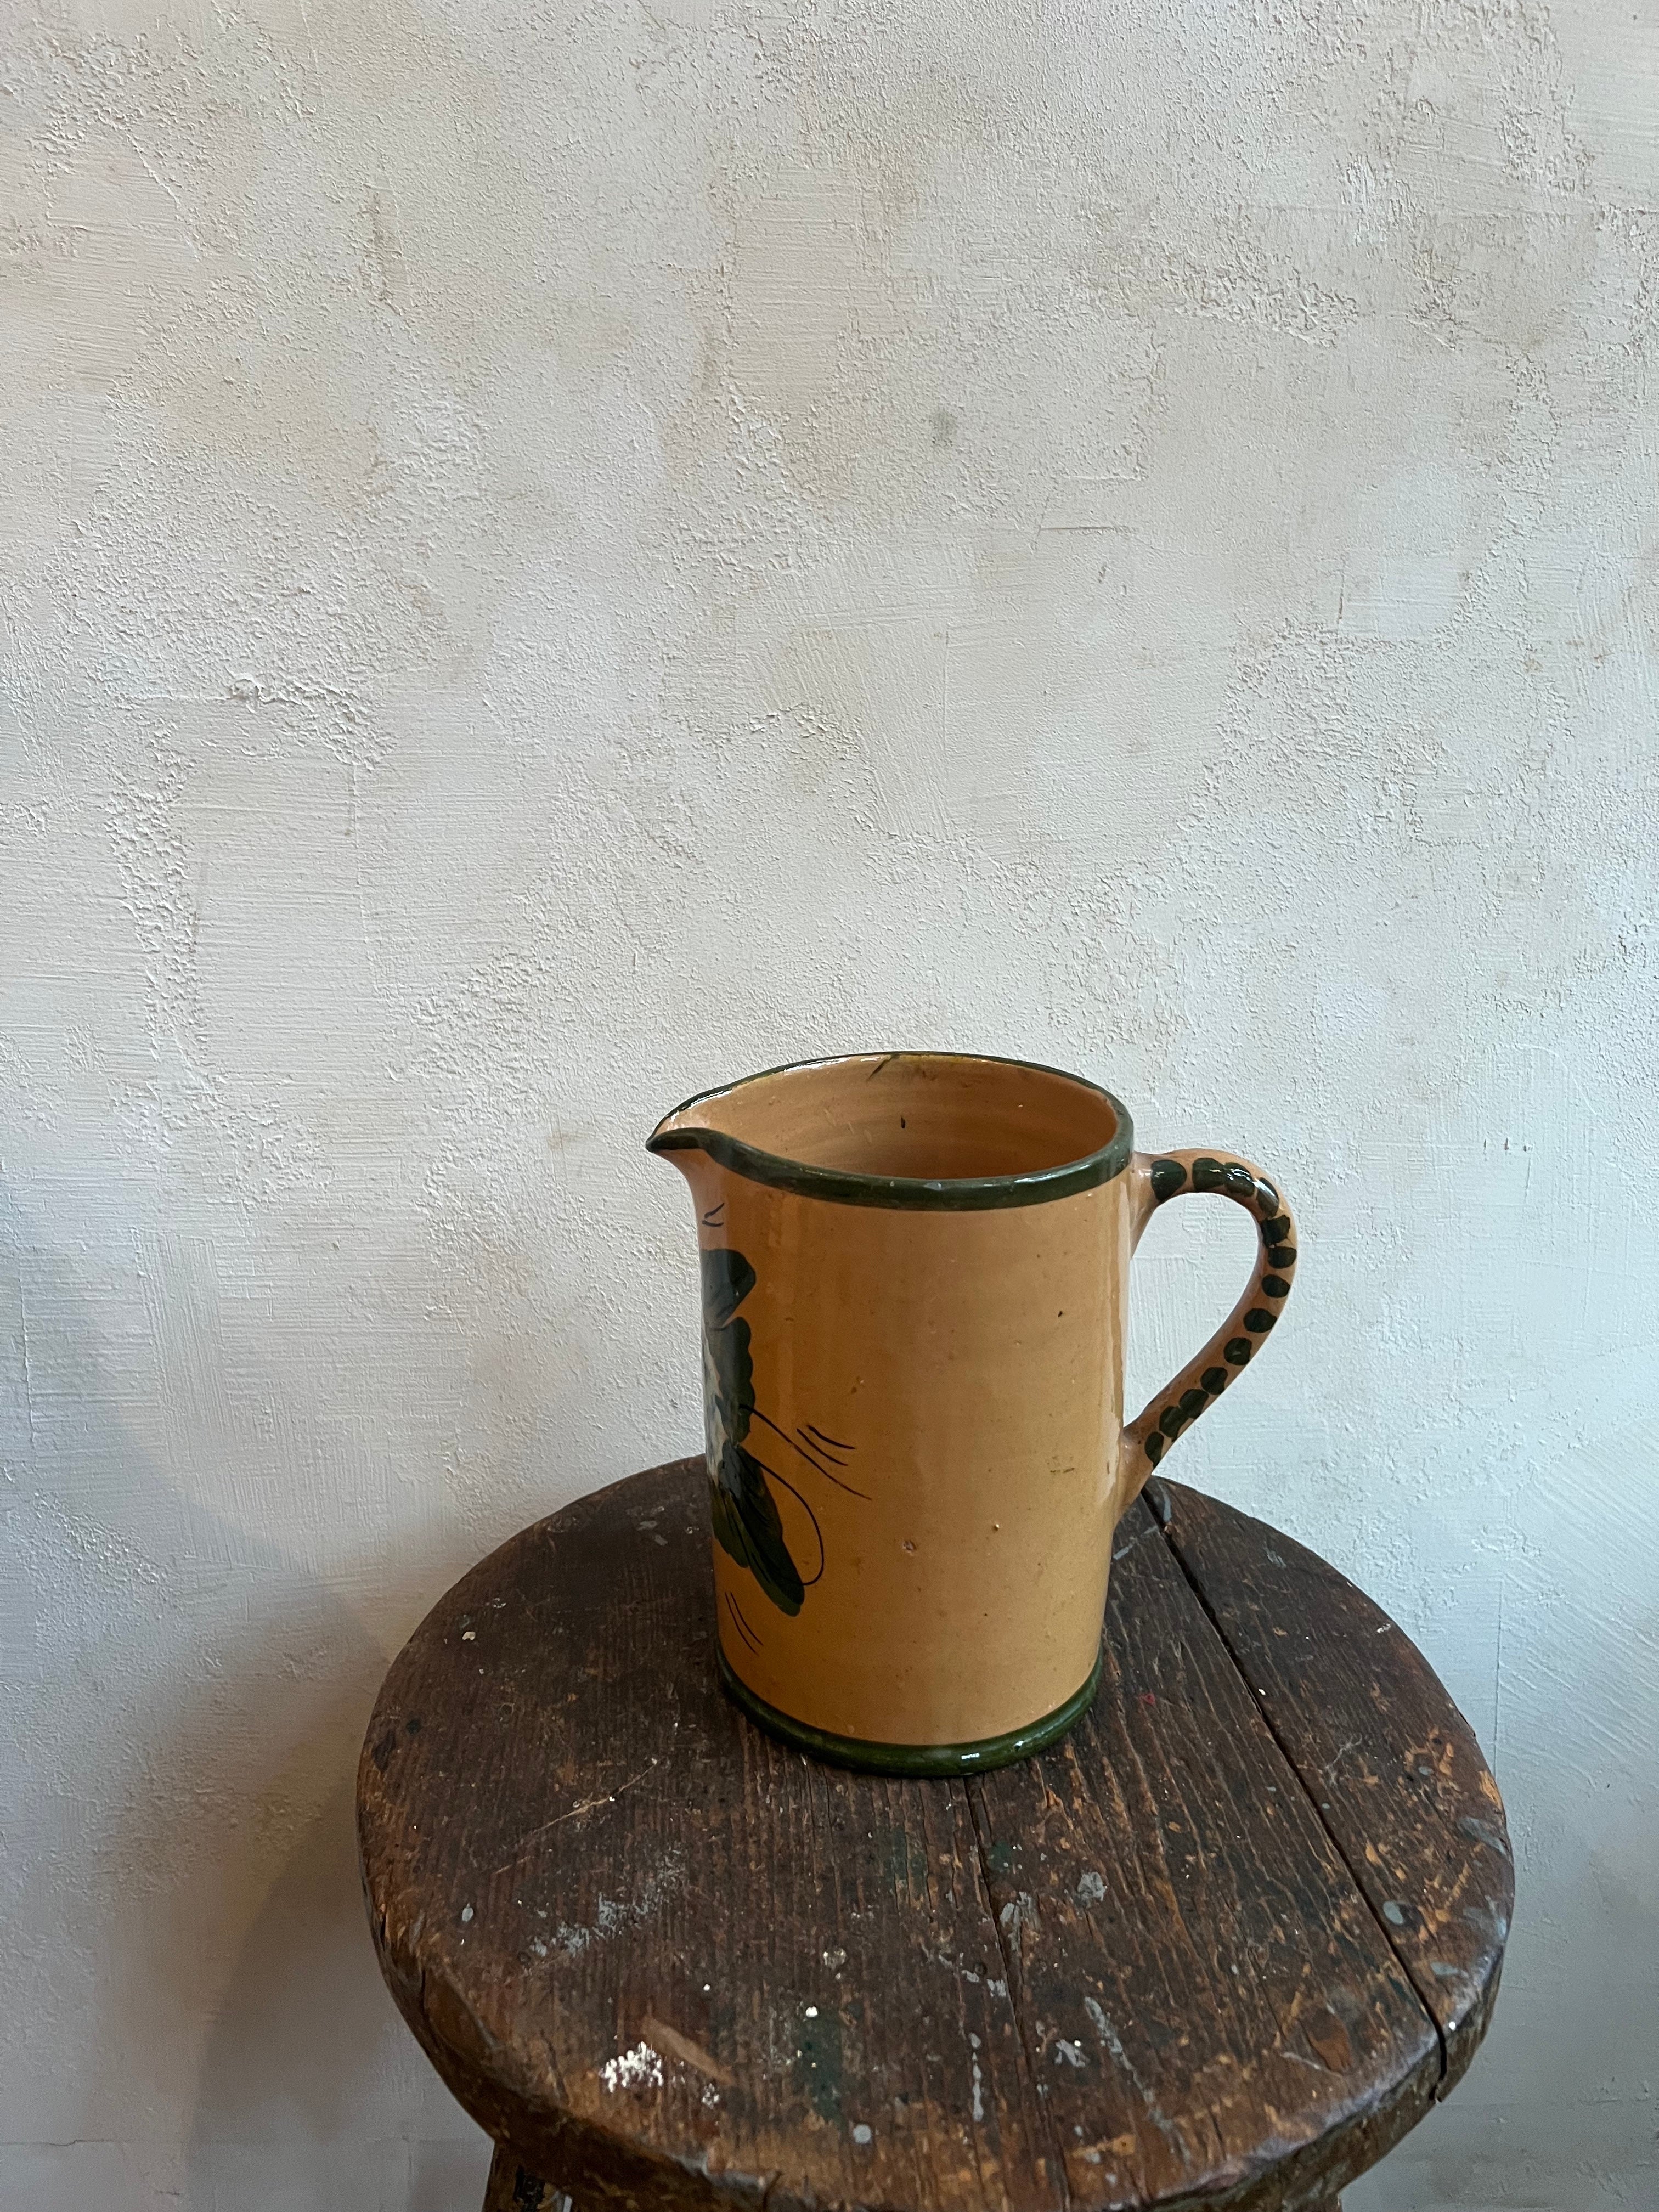 Clay Floral Painted Pitcher